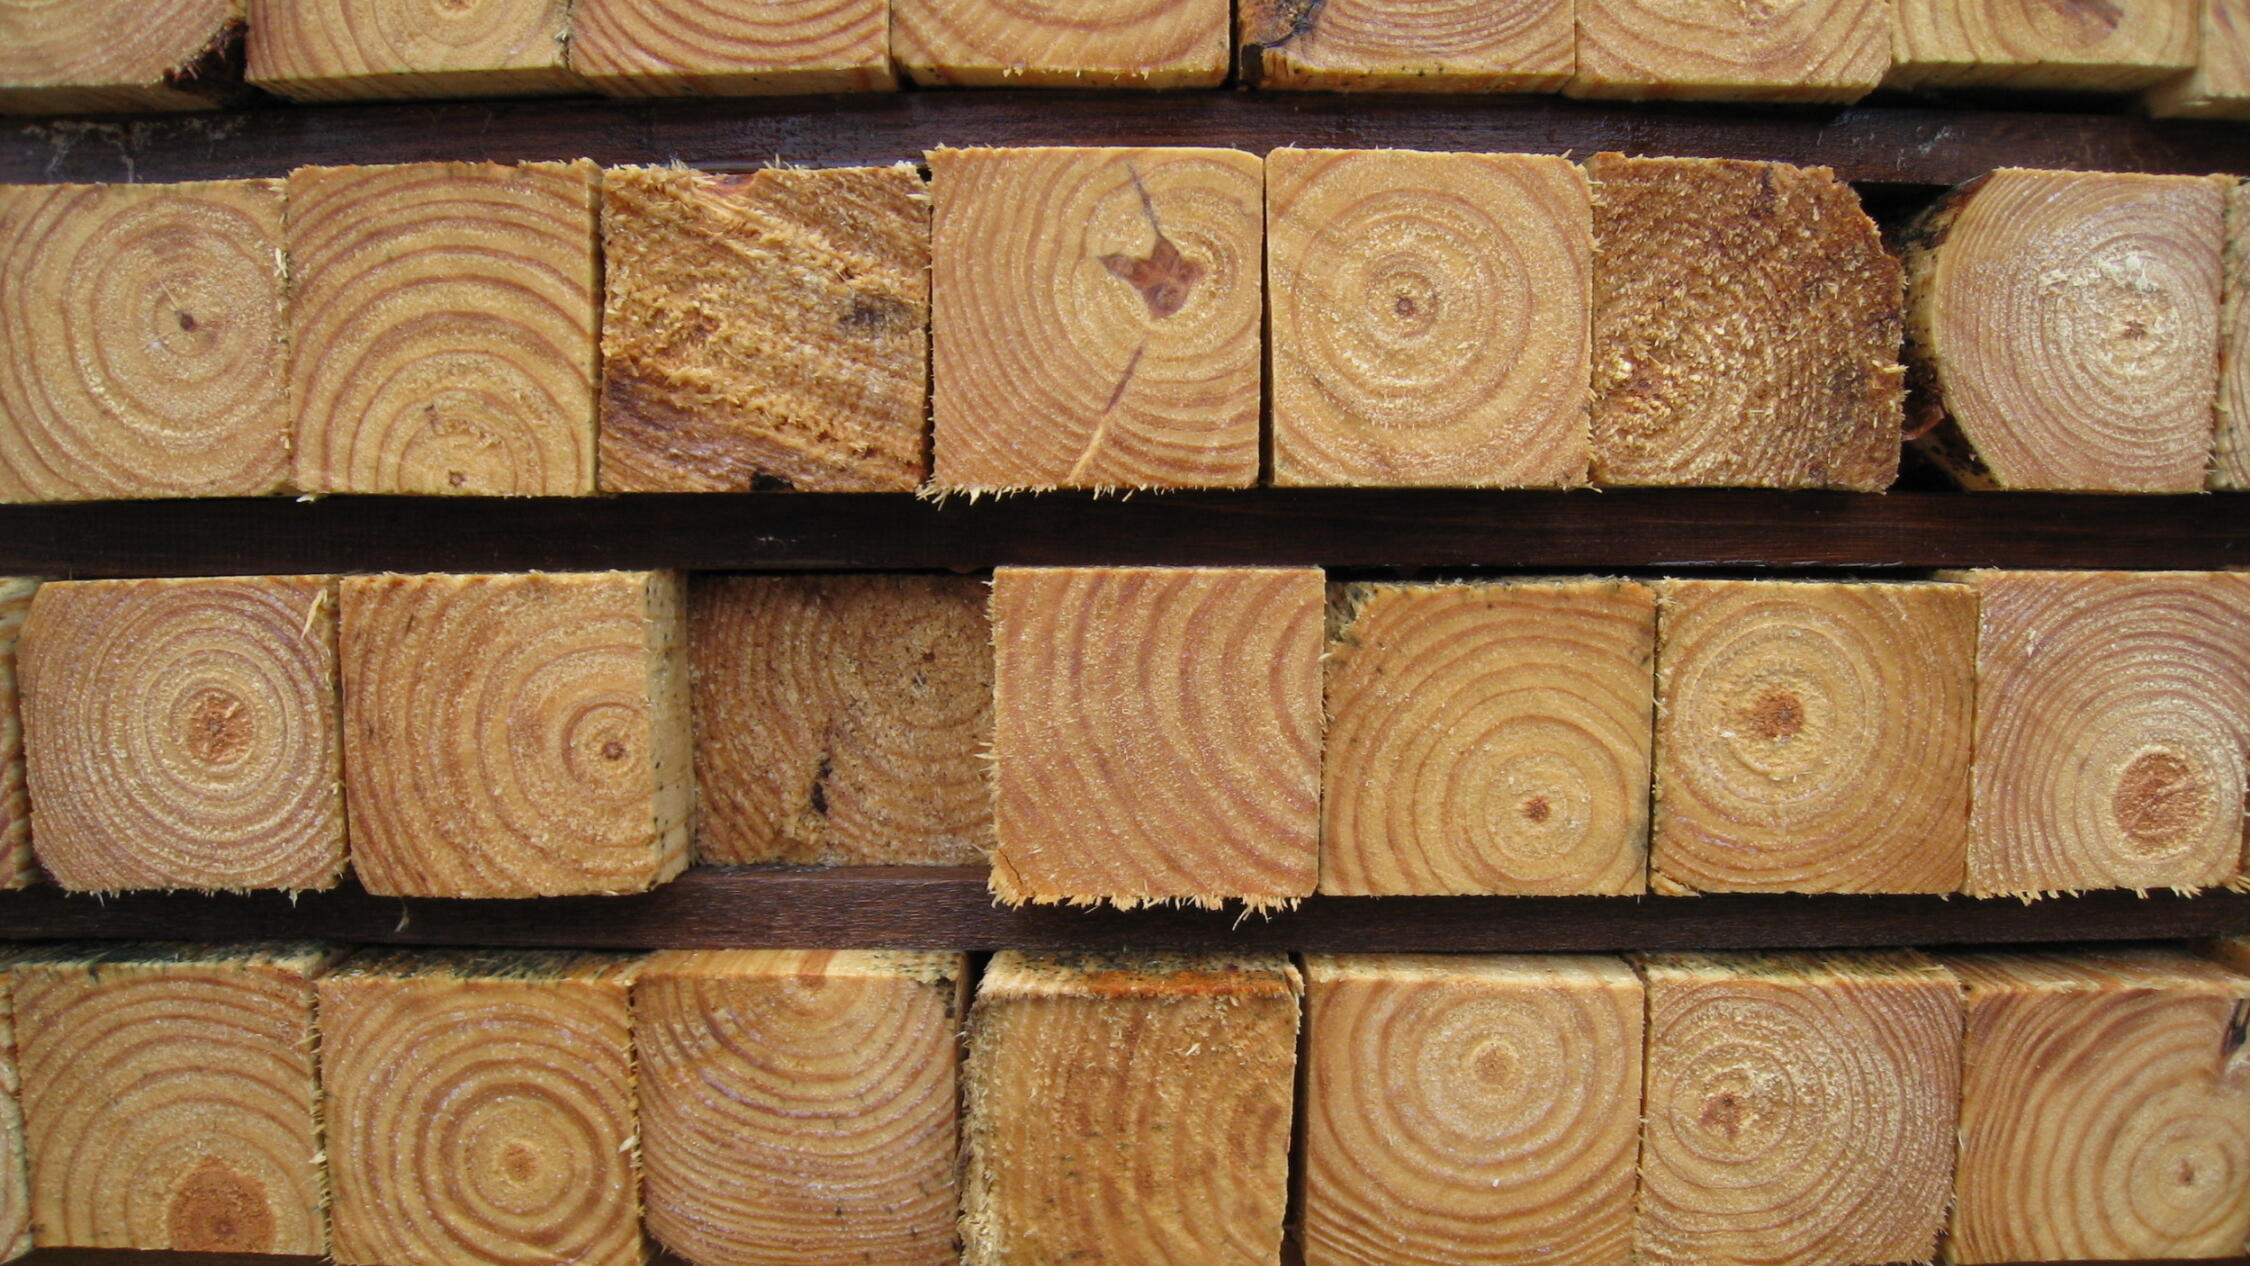 Pieces of lumber arranged in a grid